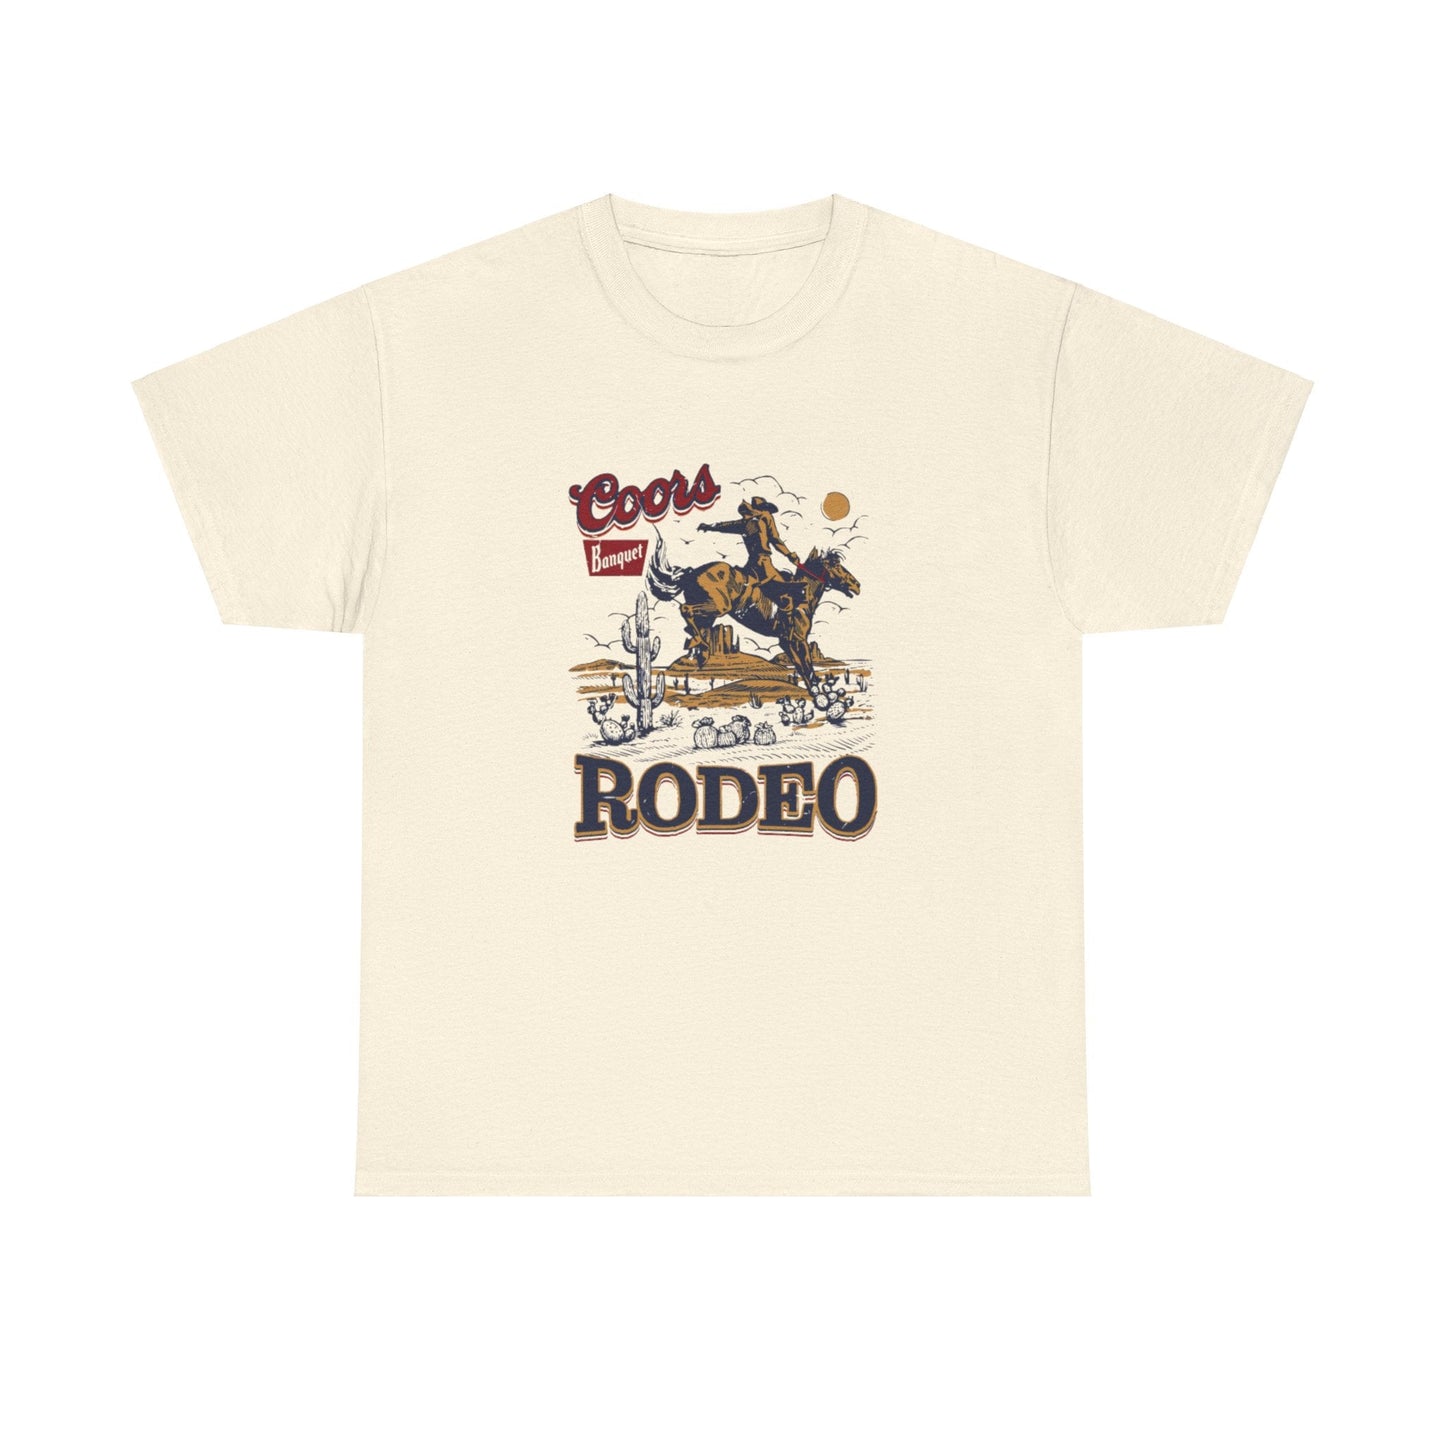 Vintage Coors Rodeo T-Shirt - RetroTeeShop